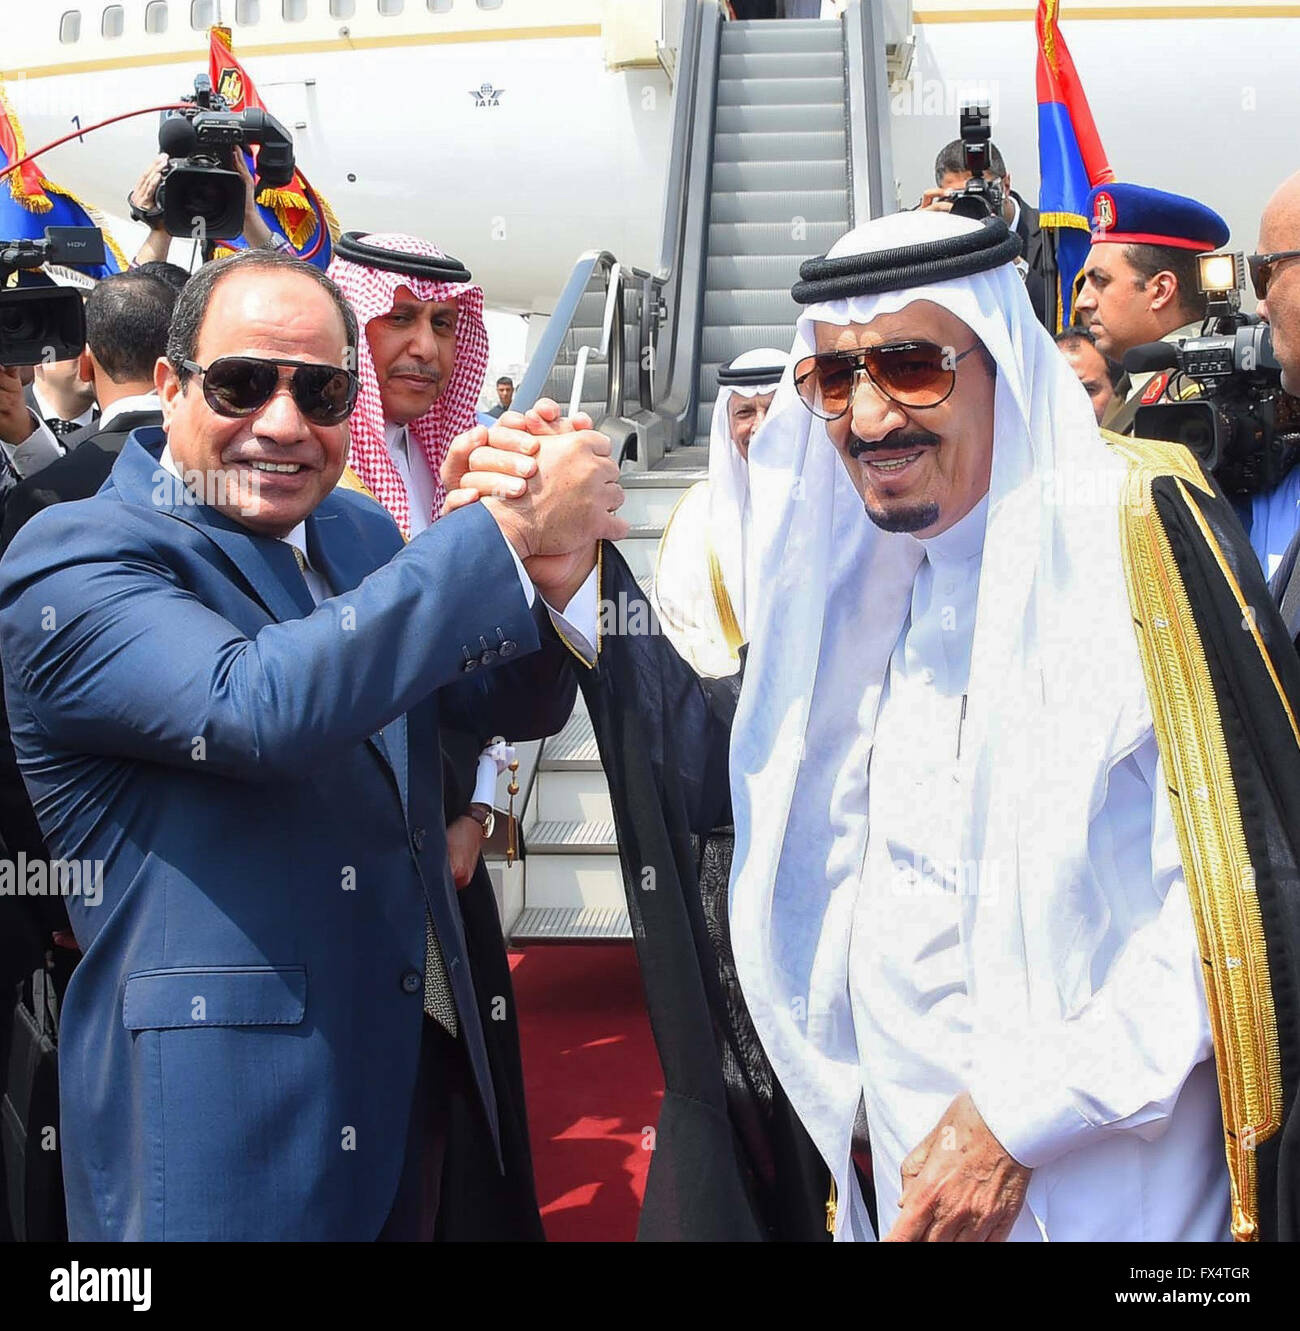 Cairo, Egypt. 11th April 2016. Saudi Arabia's King Salman at the end of an official 5-day state visit to Egypt meets with Egypt's President El-Sisi.  They signed a number of agreements, including building a bridge across the Red Sea to link the two countries, also linking Asia and Africa.  It was also announced that the sovereignty of two Red Sea islands at the mouth of the Gulf of Aqaba in the Red Sea, Tiran and Sanafir, were officially transferred to Saudi Arabia from Egypt. Credit:  Egyptian Presidency Handout Photo/Barry Iverson/Alamy Live News Stock Photo